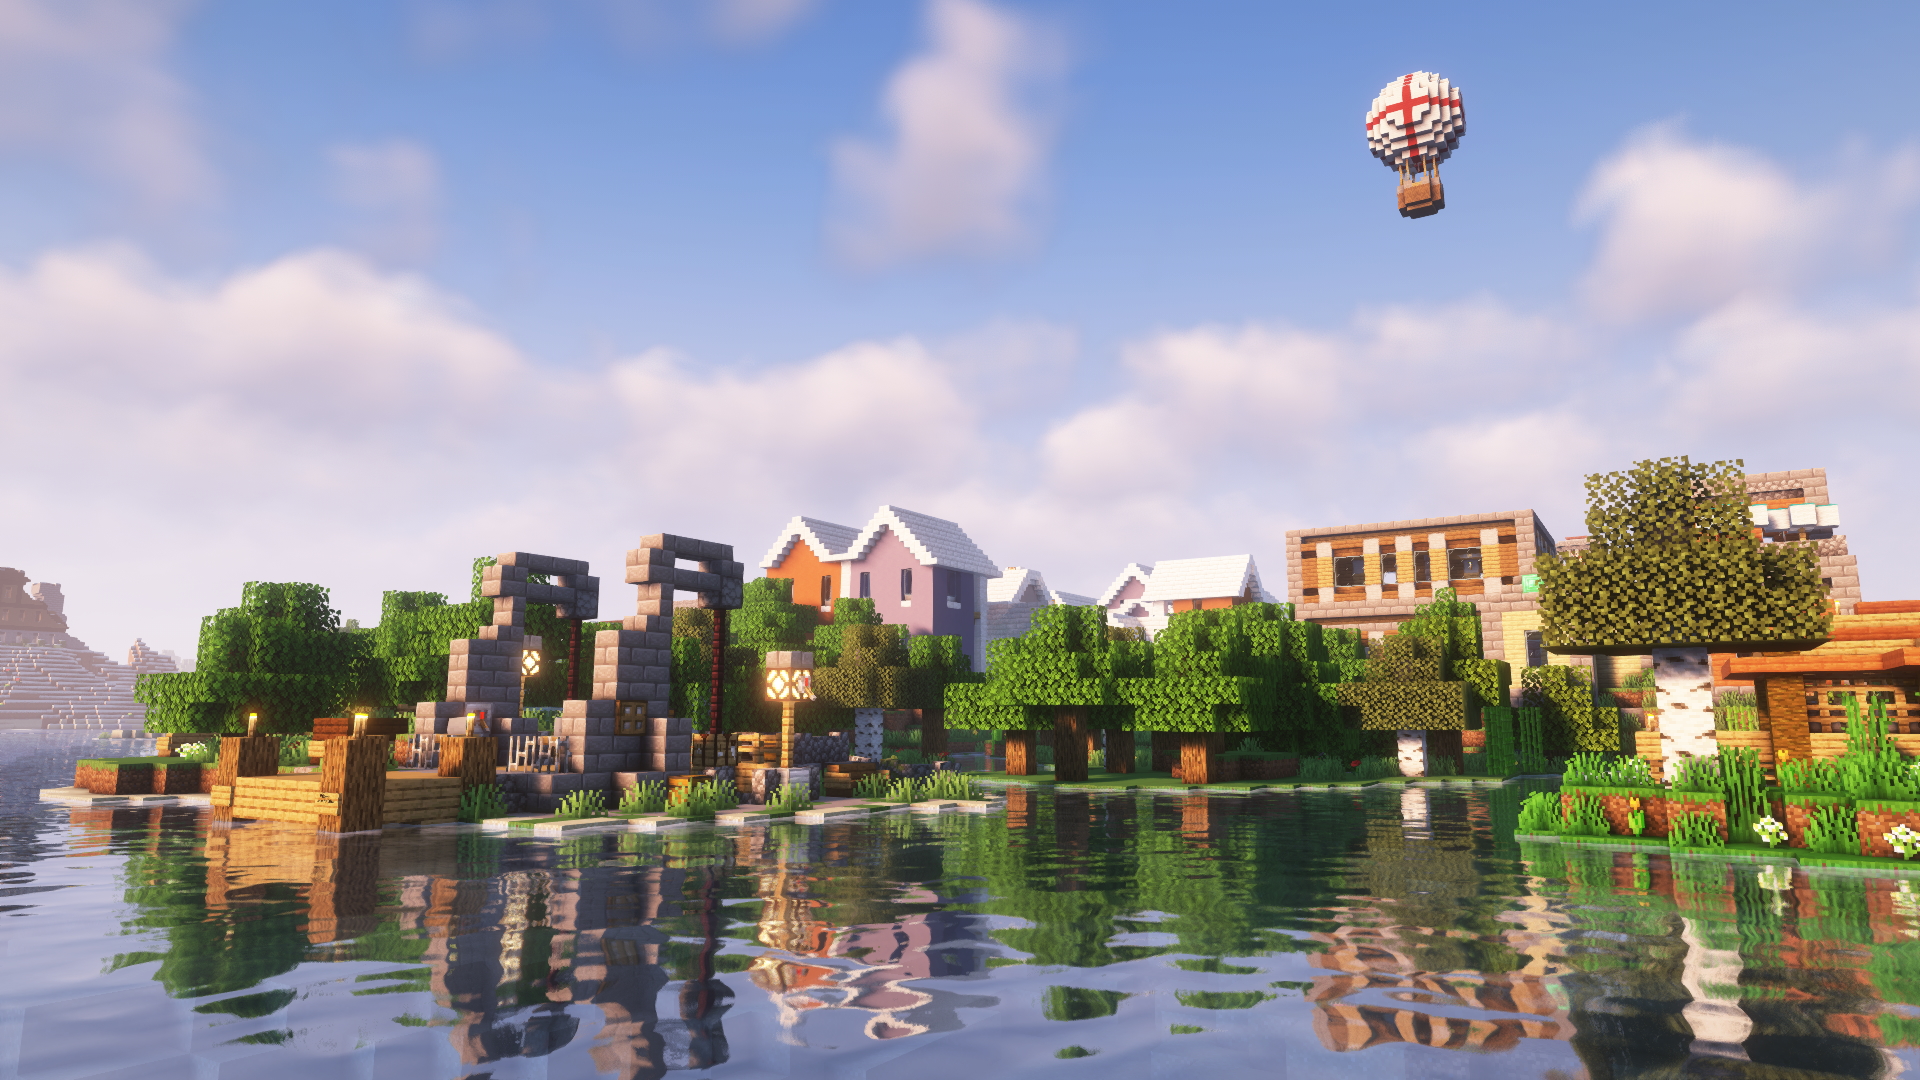 Minecraft Shaders Water Video Games Sky Clouds Cube Village Trees Hot Air Balloons CGi 1920x1080